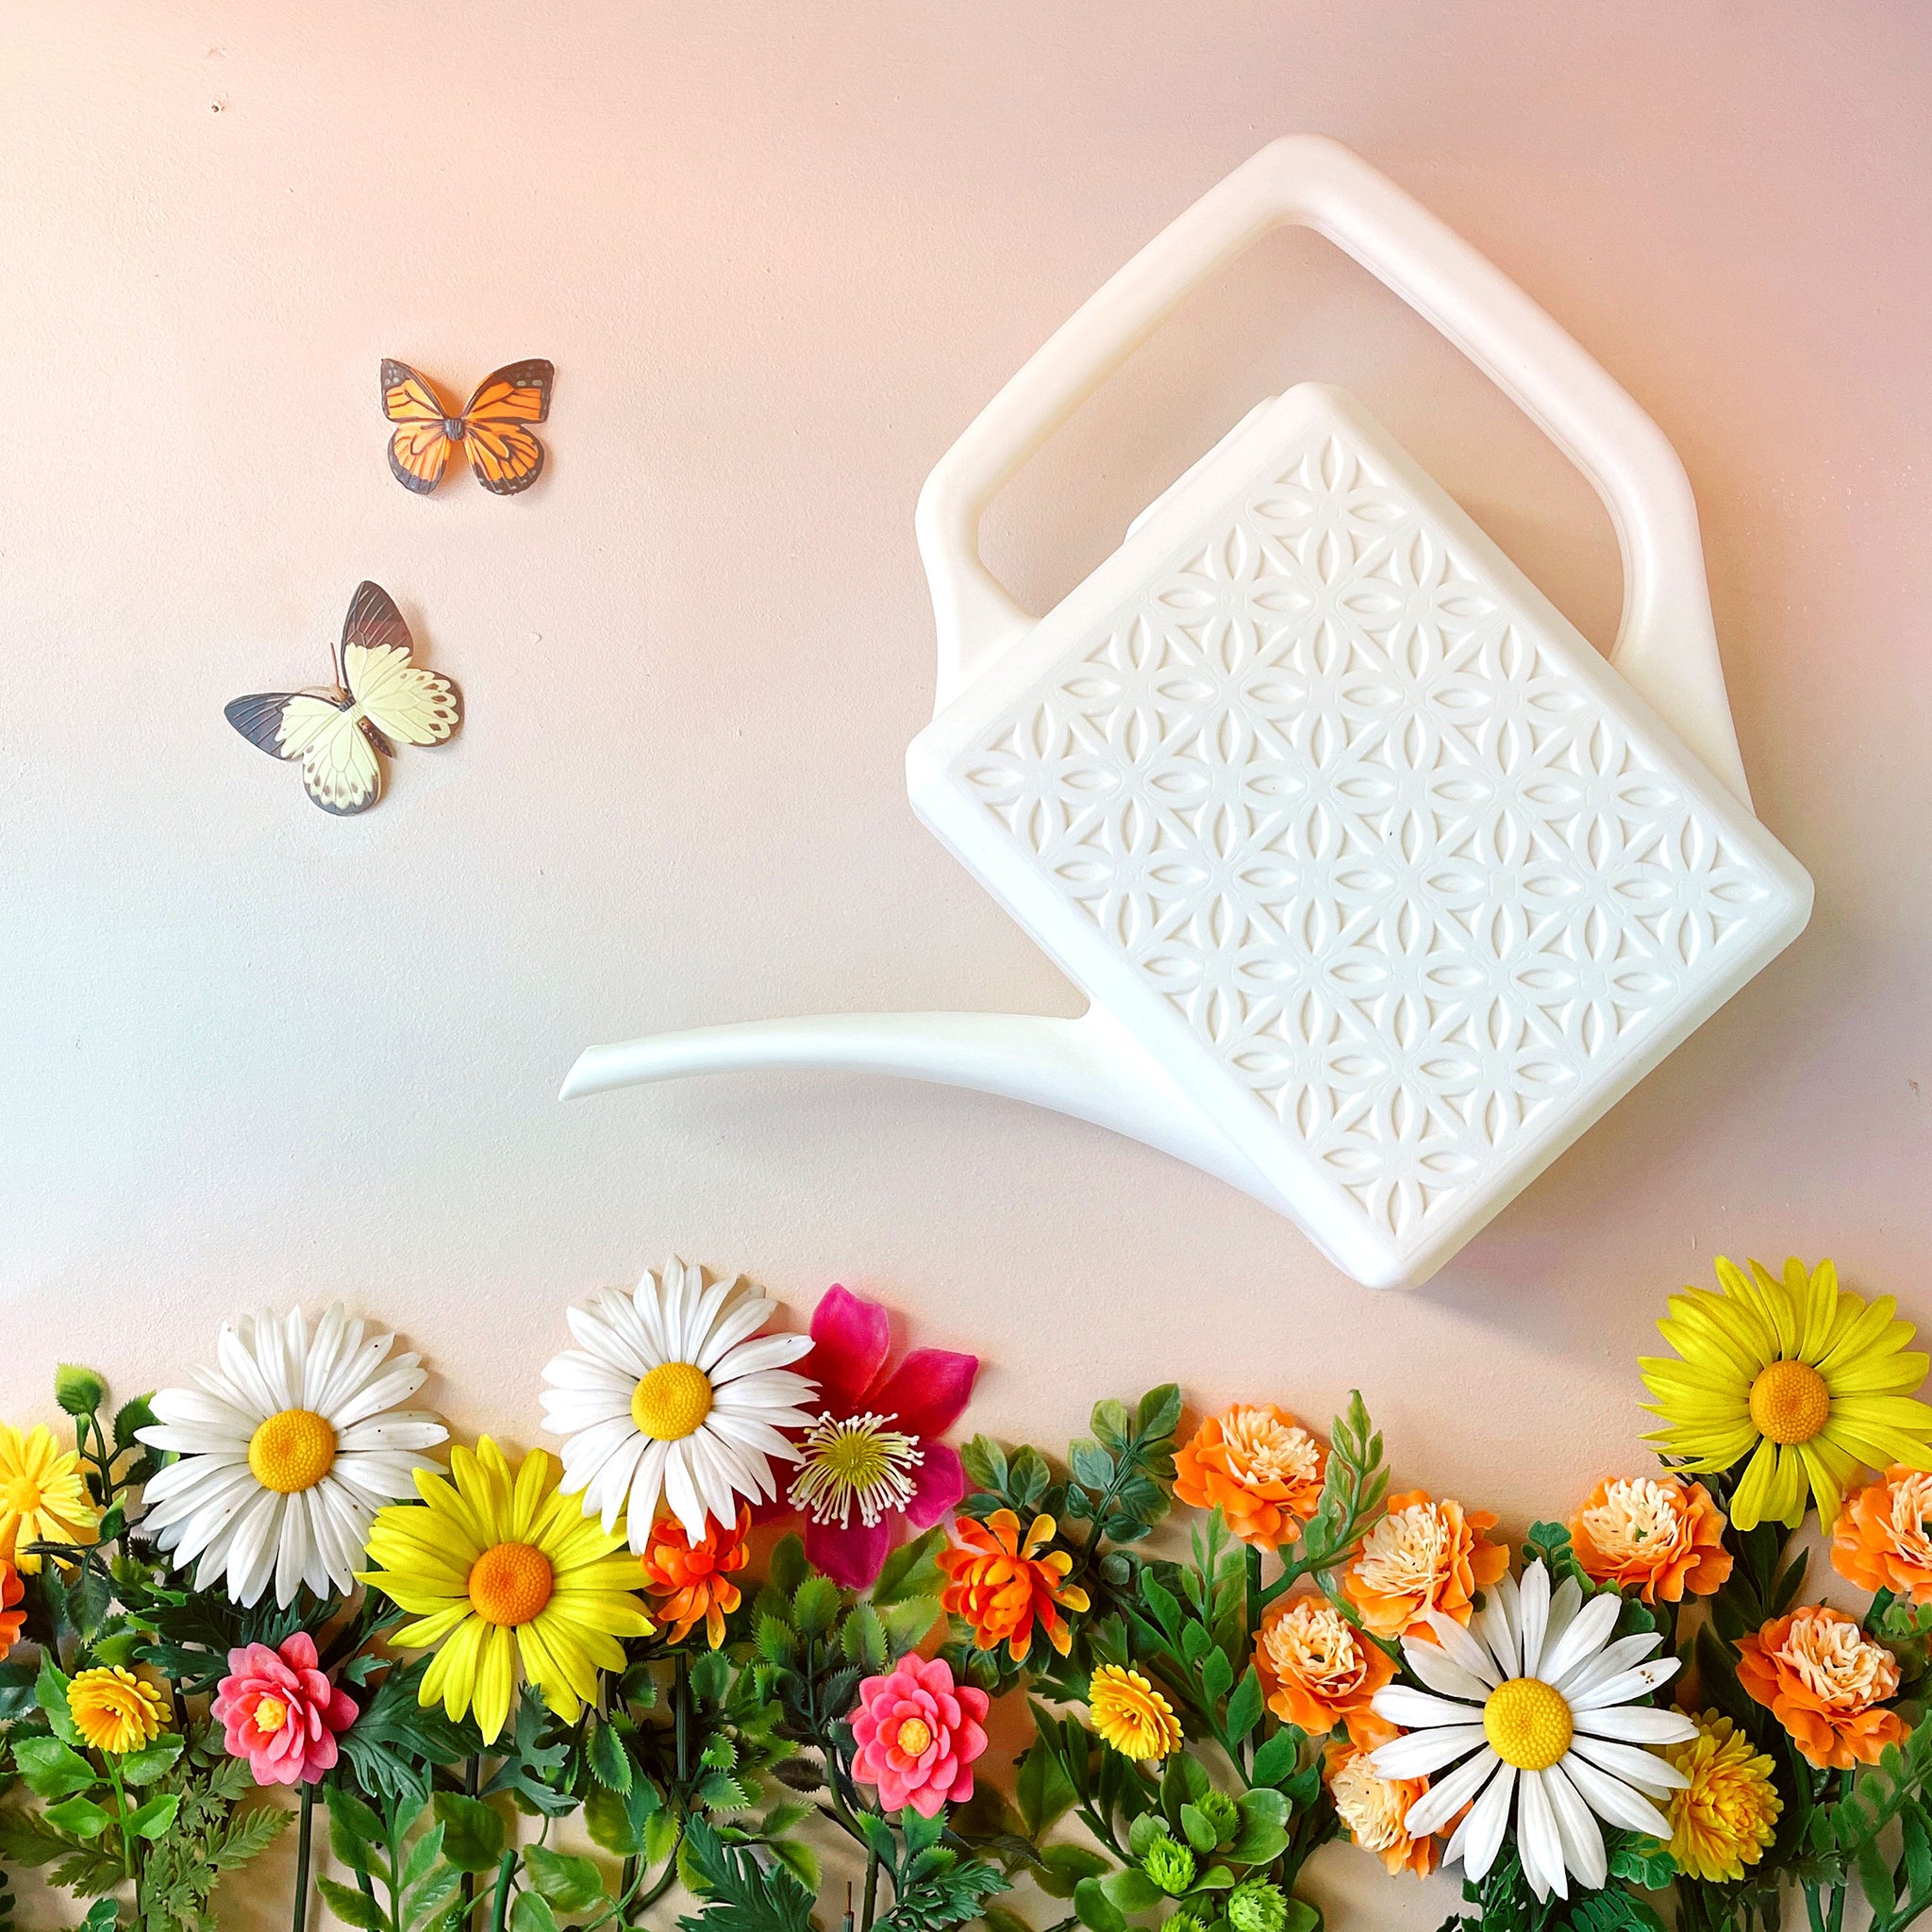 An ivory plastic watering can with a narrow spout and square handle and a rectangle breeze block design on the sides. This photograph has the watering can staged above a bed of pink, yellow and white florals and two butterflies on the left hand side.